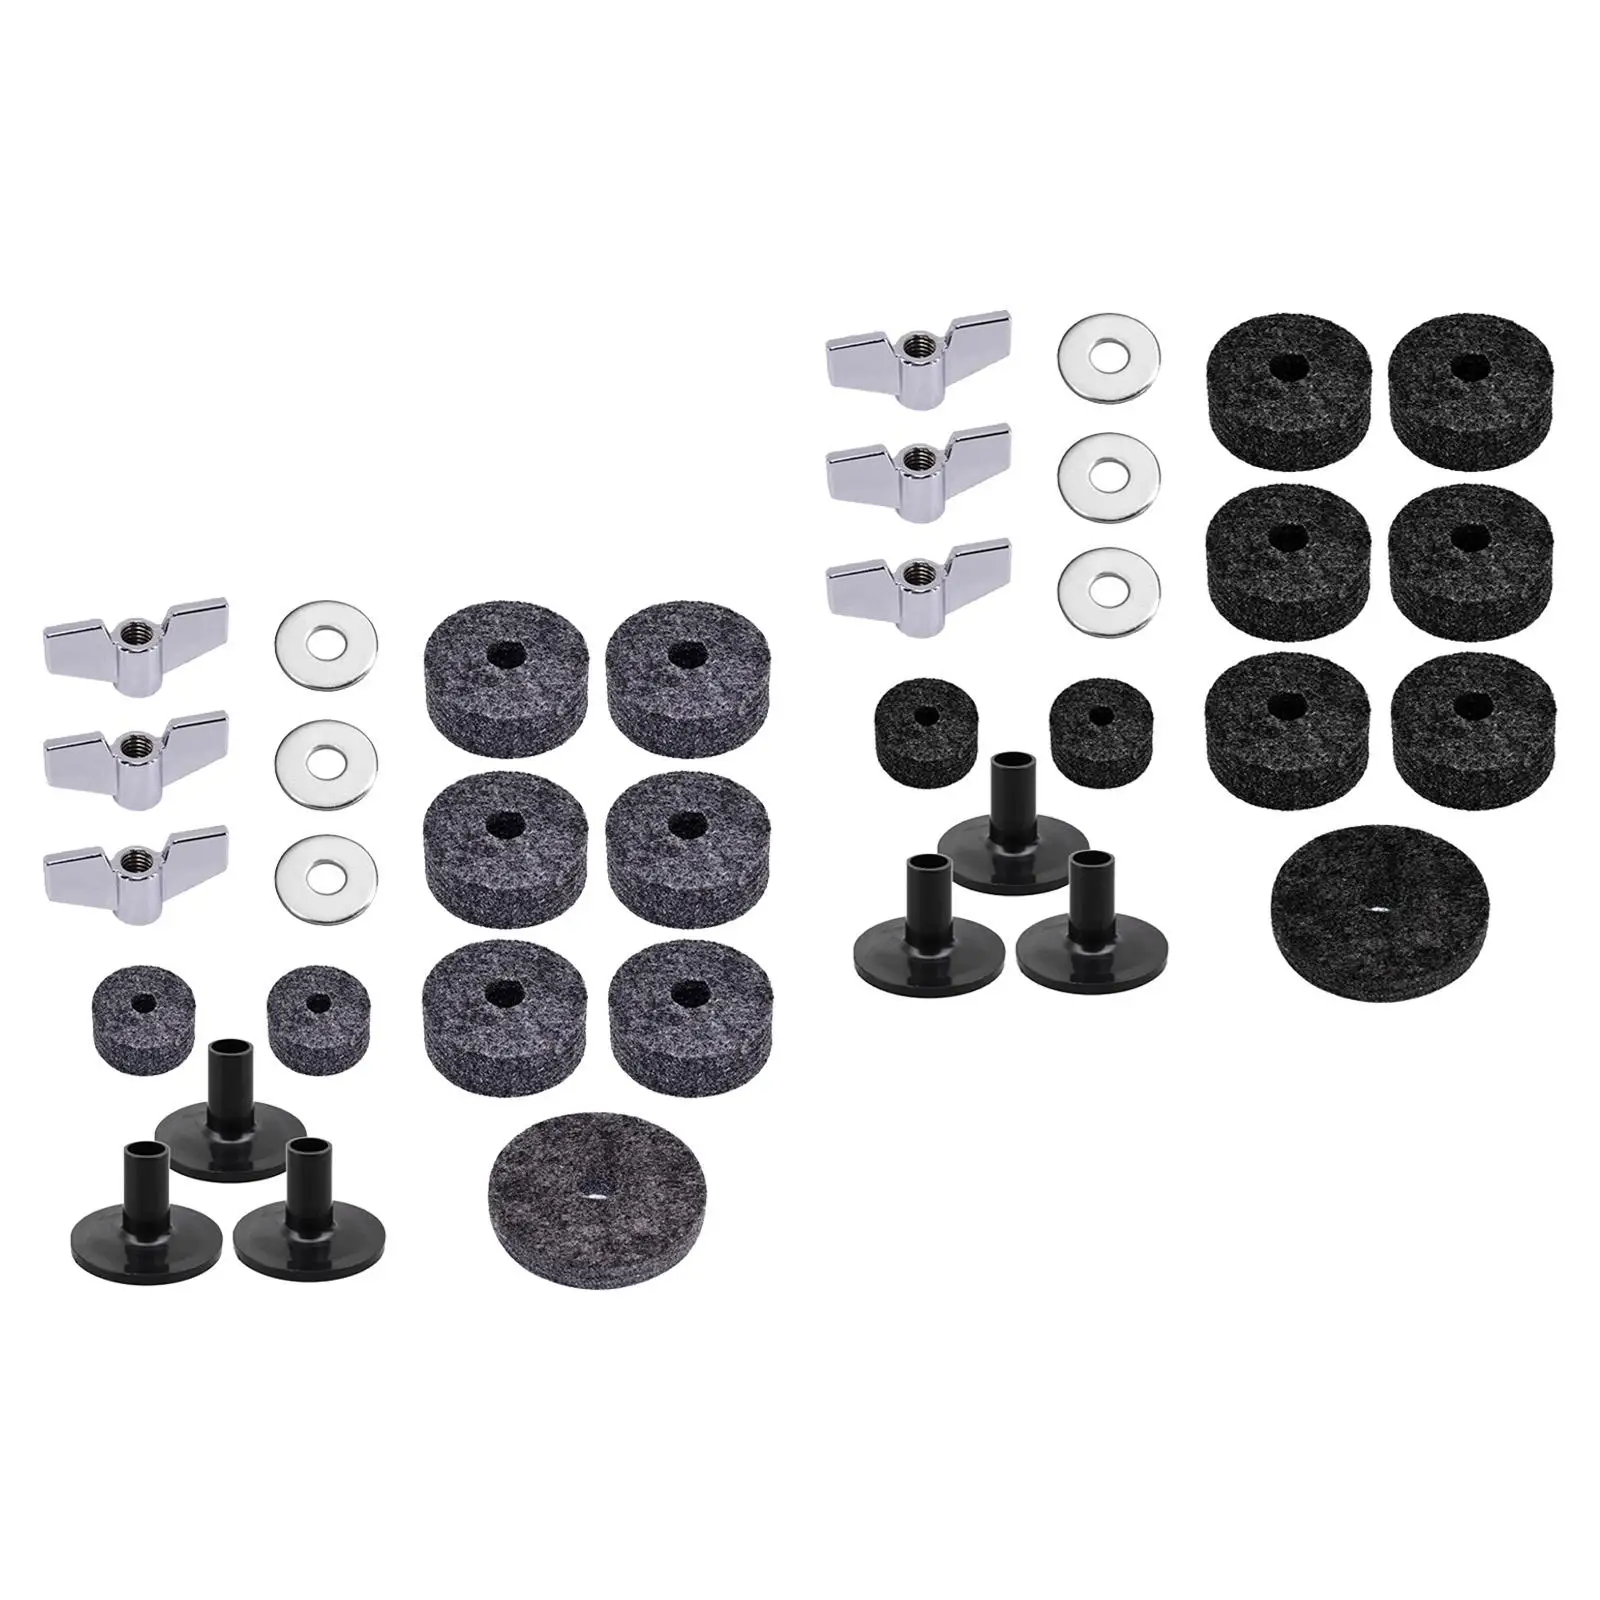 Drum Sets Replacement, Cymbal Felt Washer Replacement Kit, Drum Accessories, for Musician